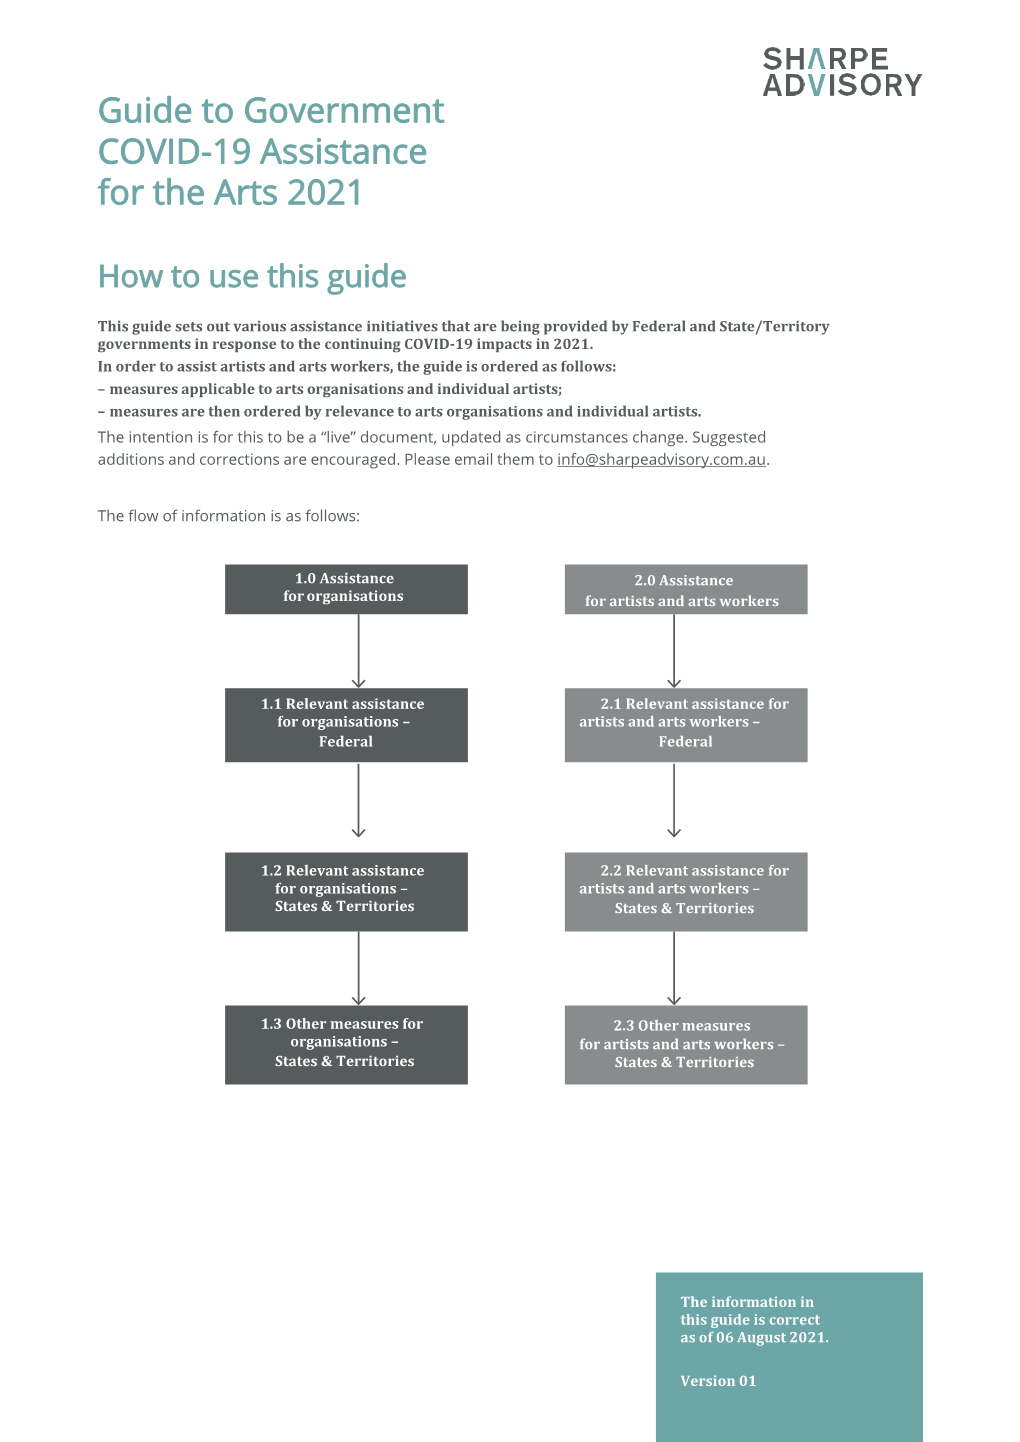 Guide to Government COVID-19 Assistance for the Arts 2021